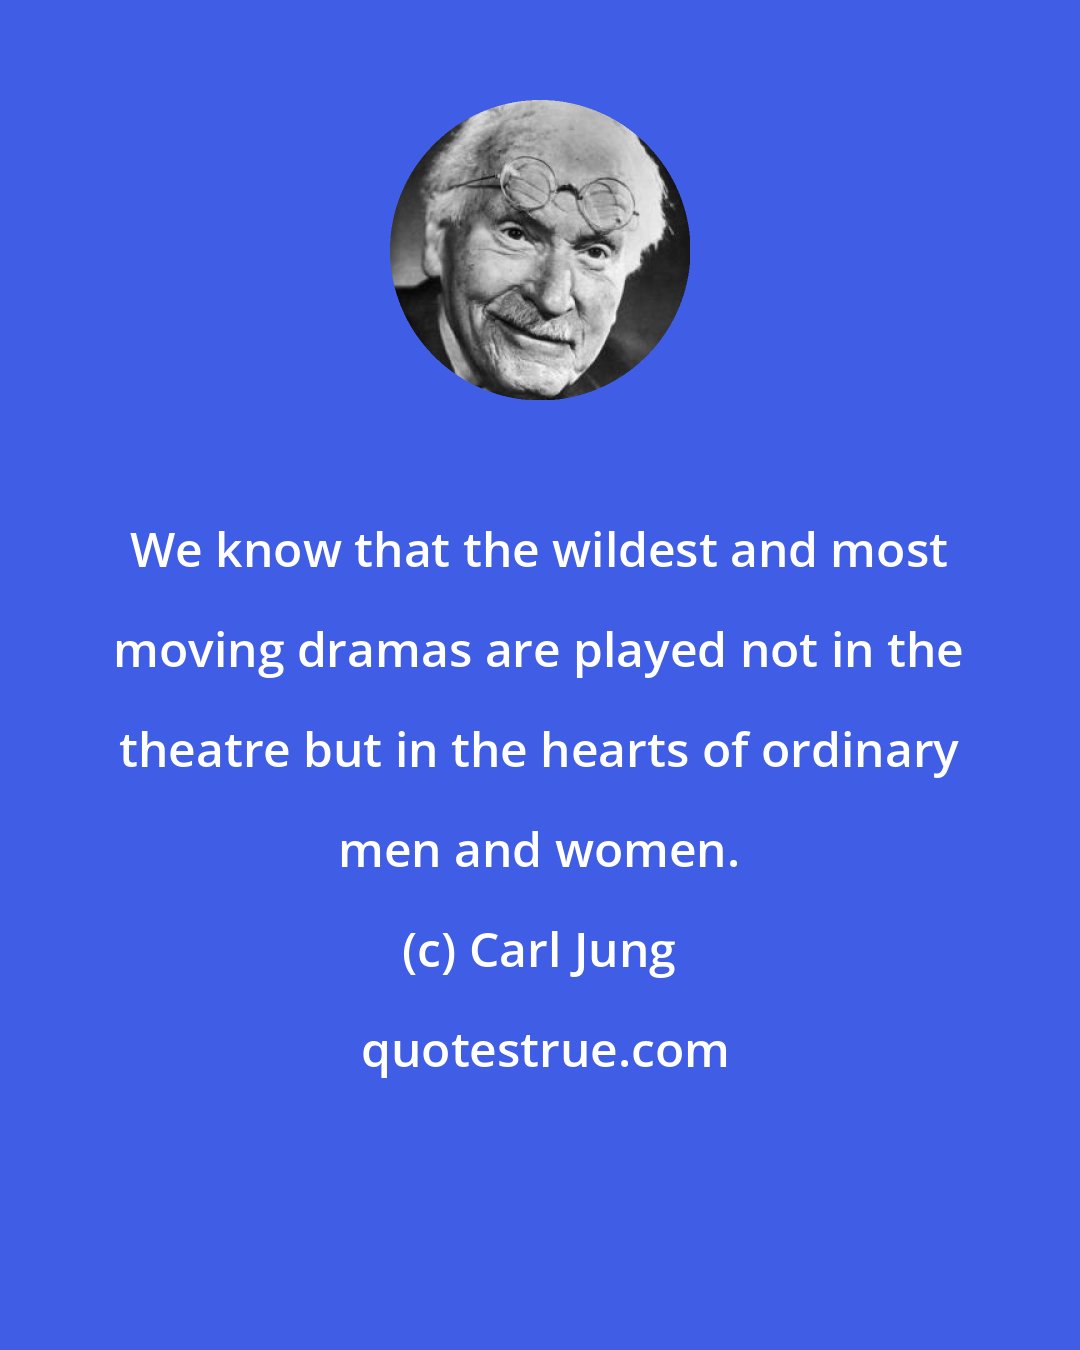 Carl Jung: We know that the wildest and most moving dramas are played not in the theatre but in the hearts of ordinary men and women.